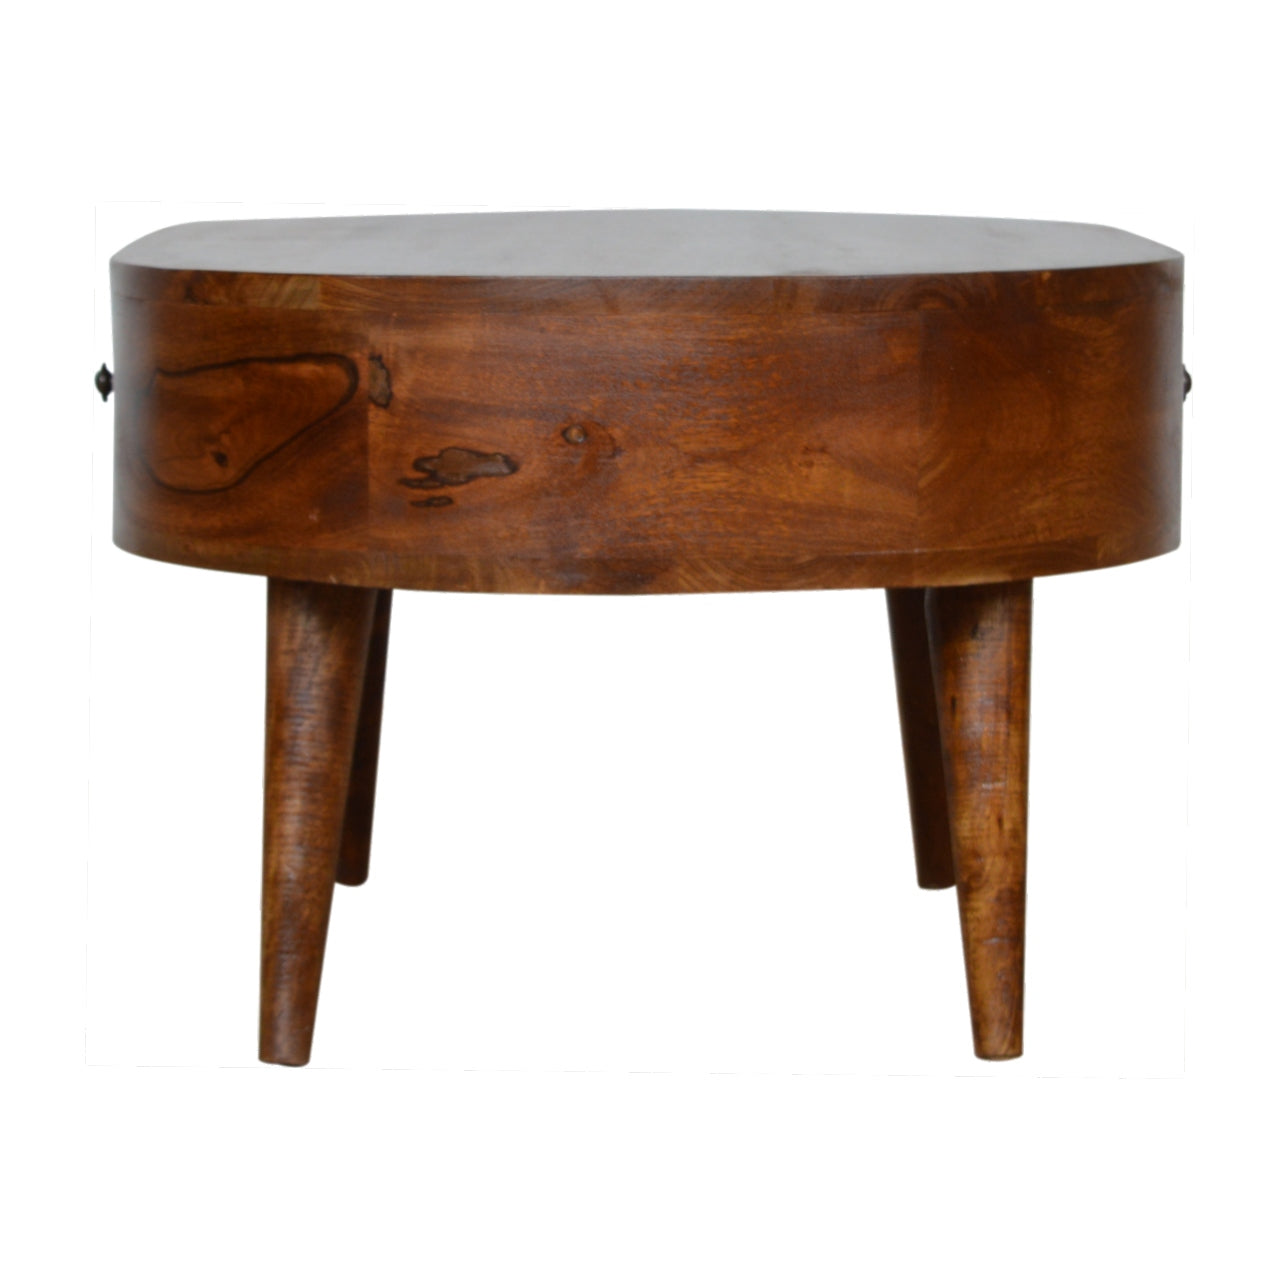 Solid Wood Chestnut Rounded Coffee Table with Drawer